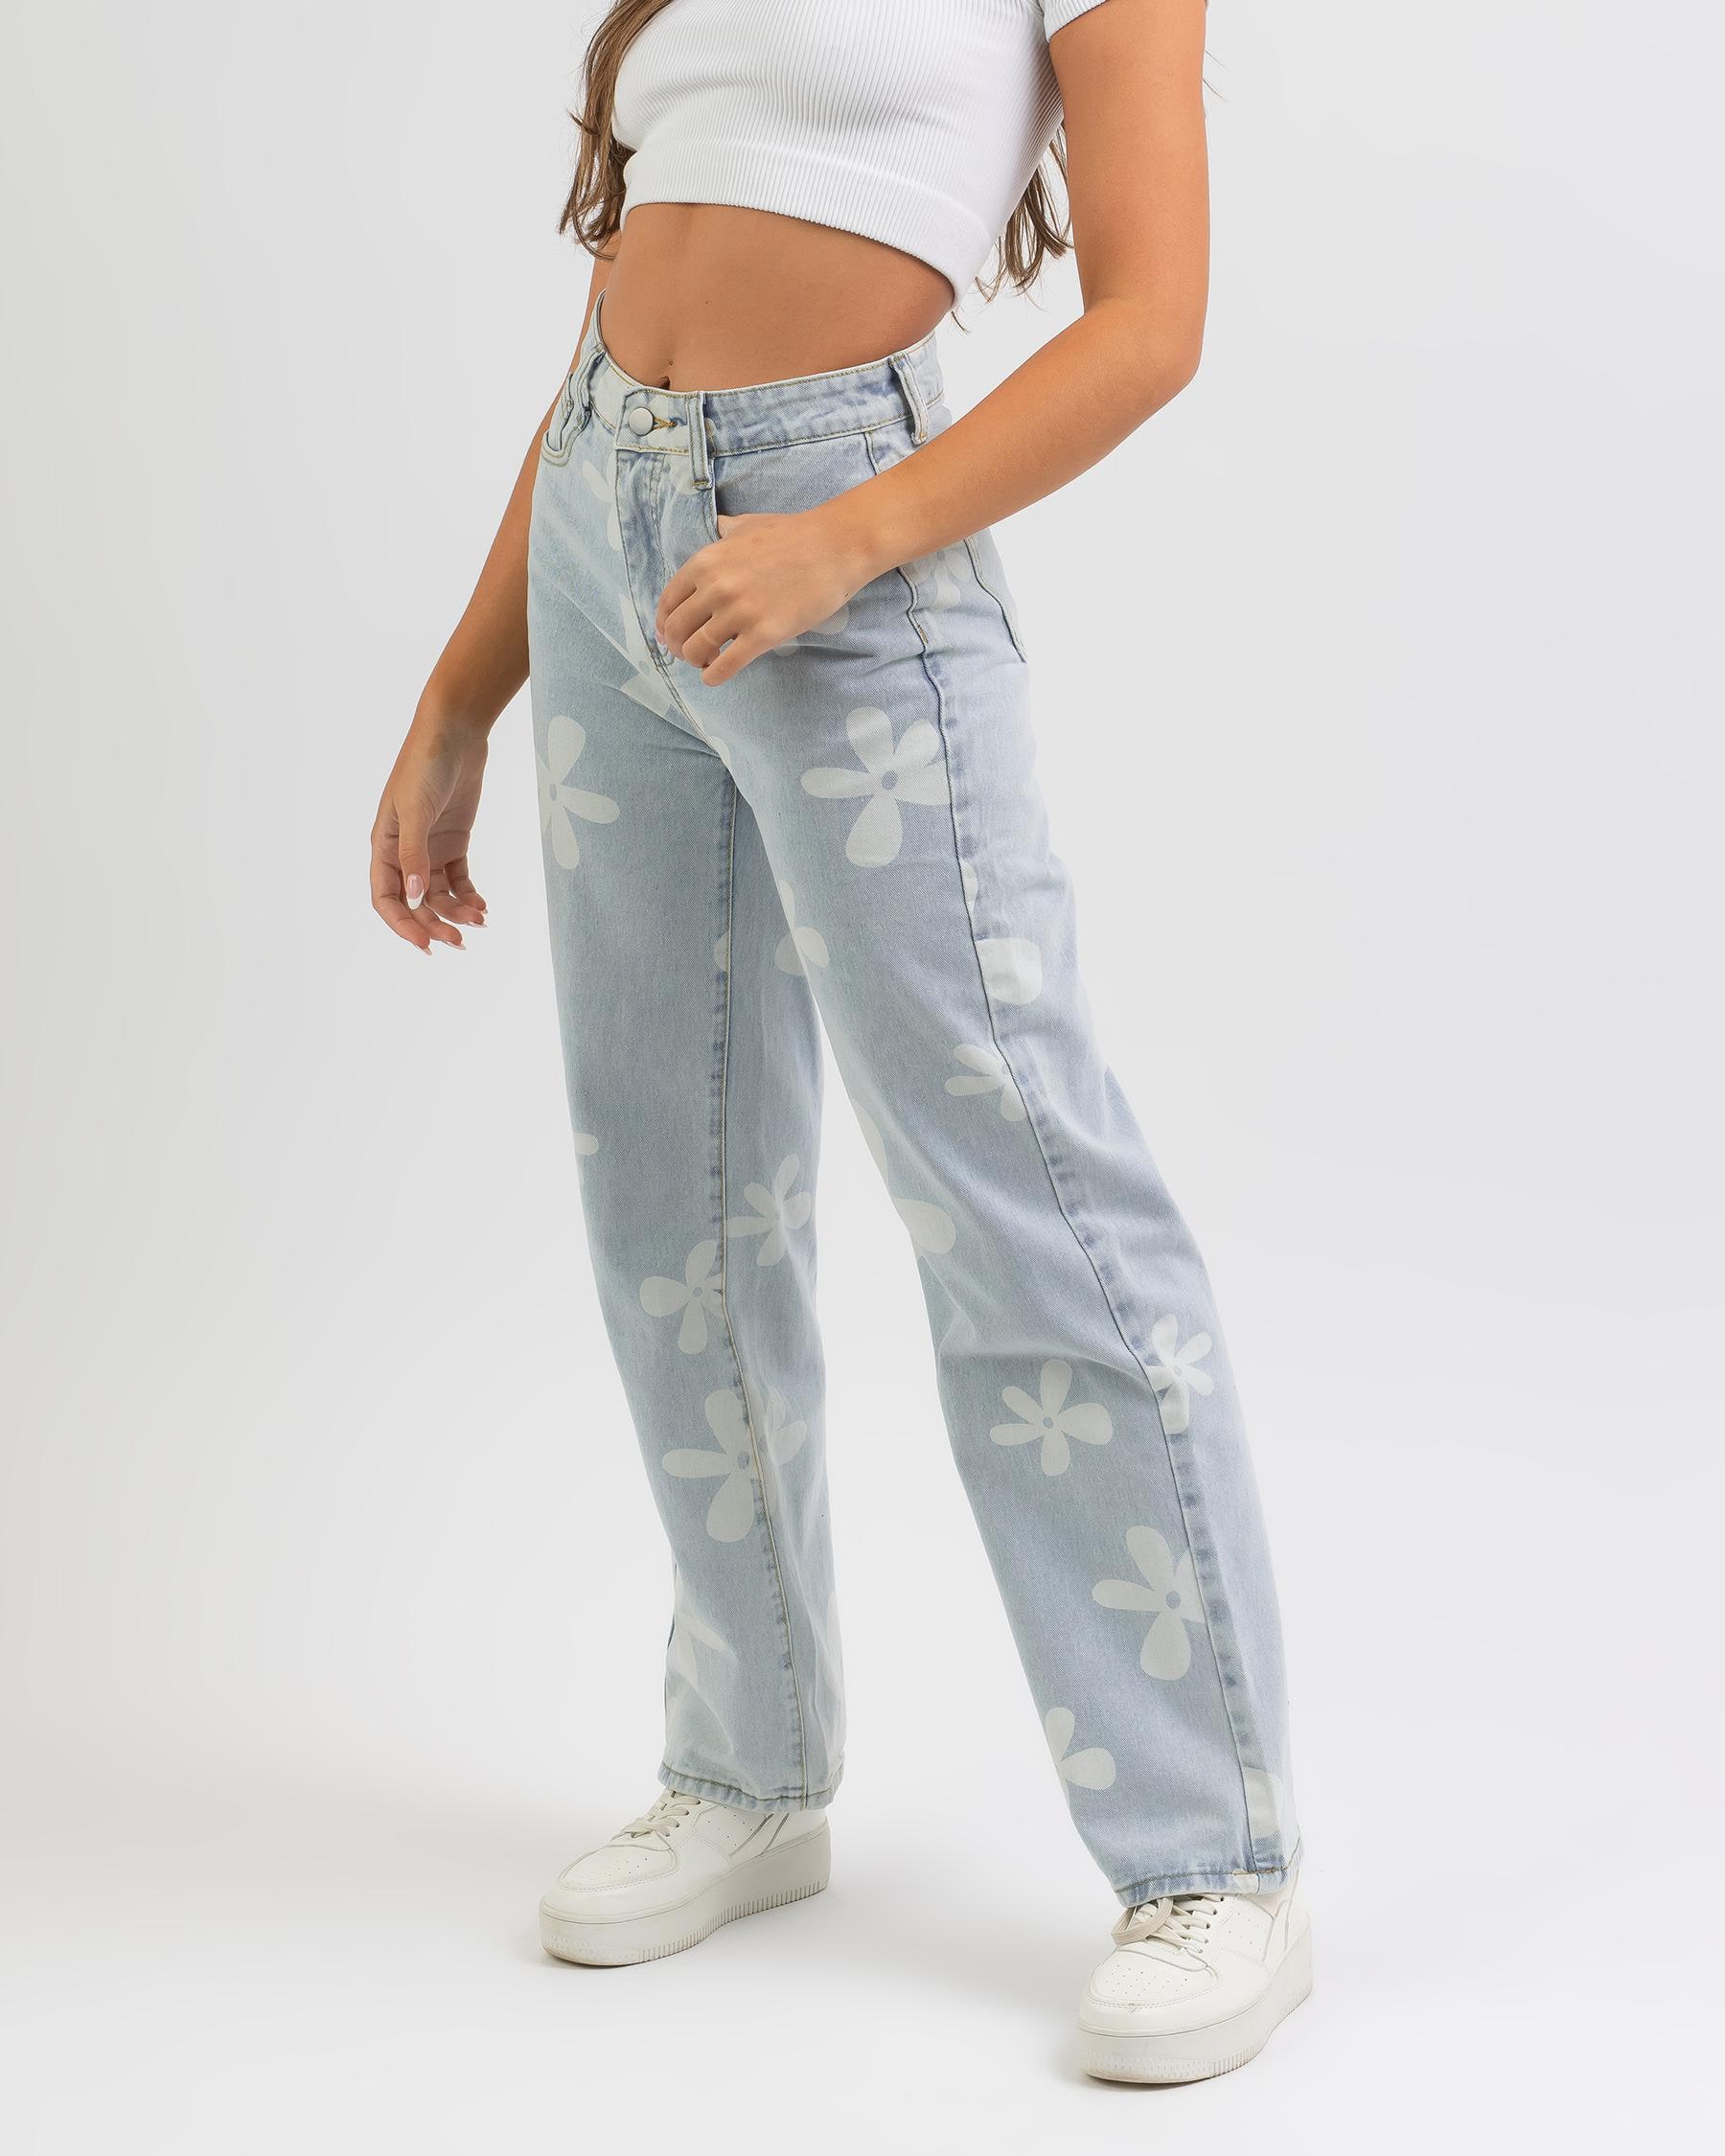 DESU Fleur Jeans In Light Mid - Fast Shipping & Easy Returns - City ...